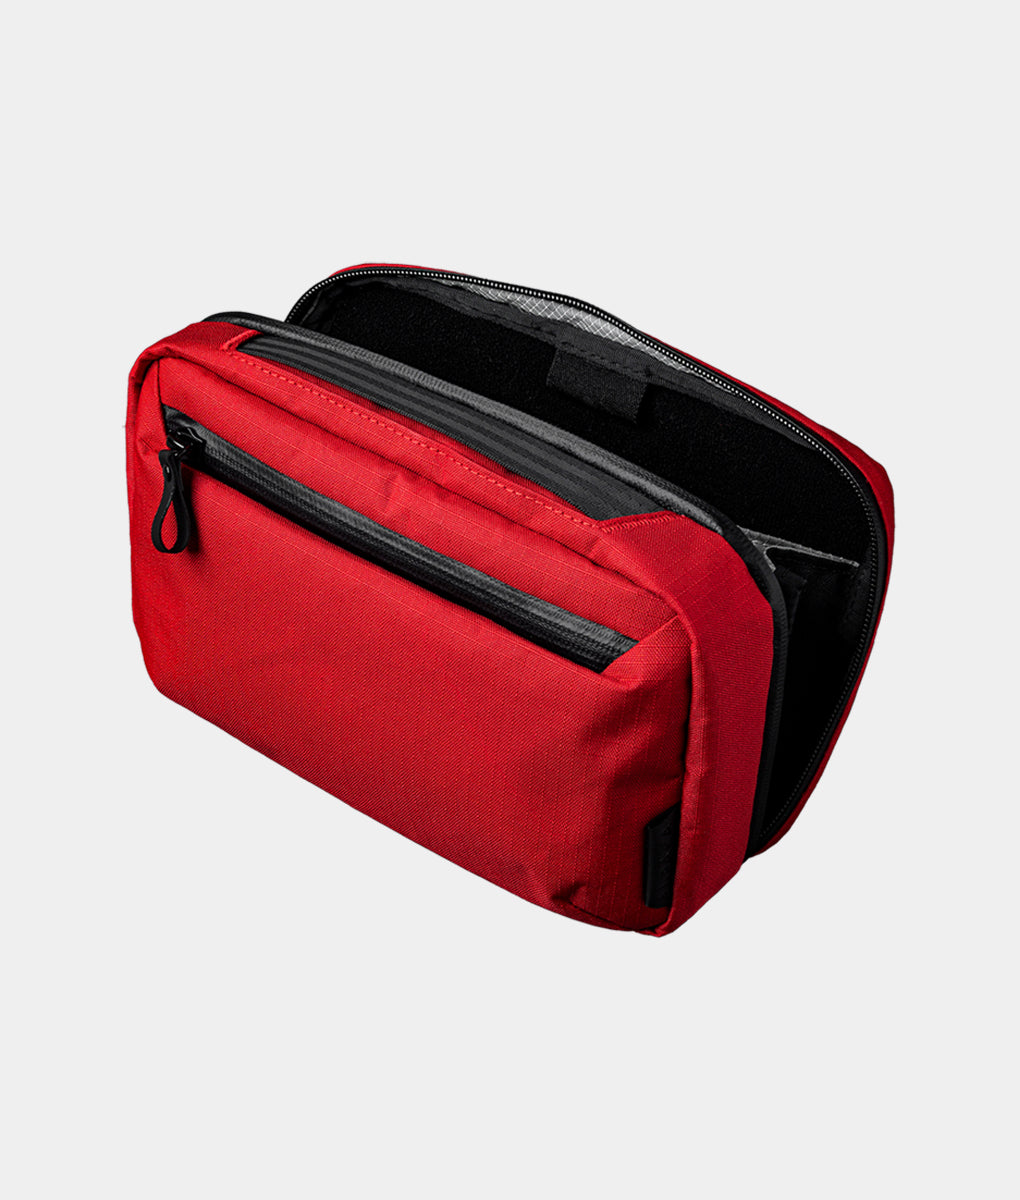 Elements Tech Case Max - EPLX450 Revel Red